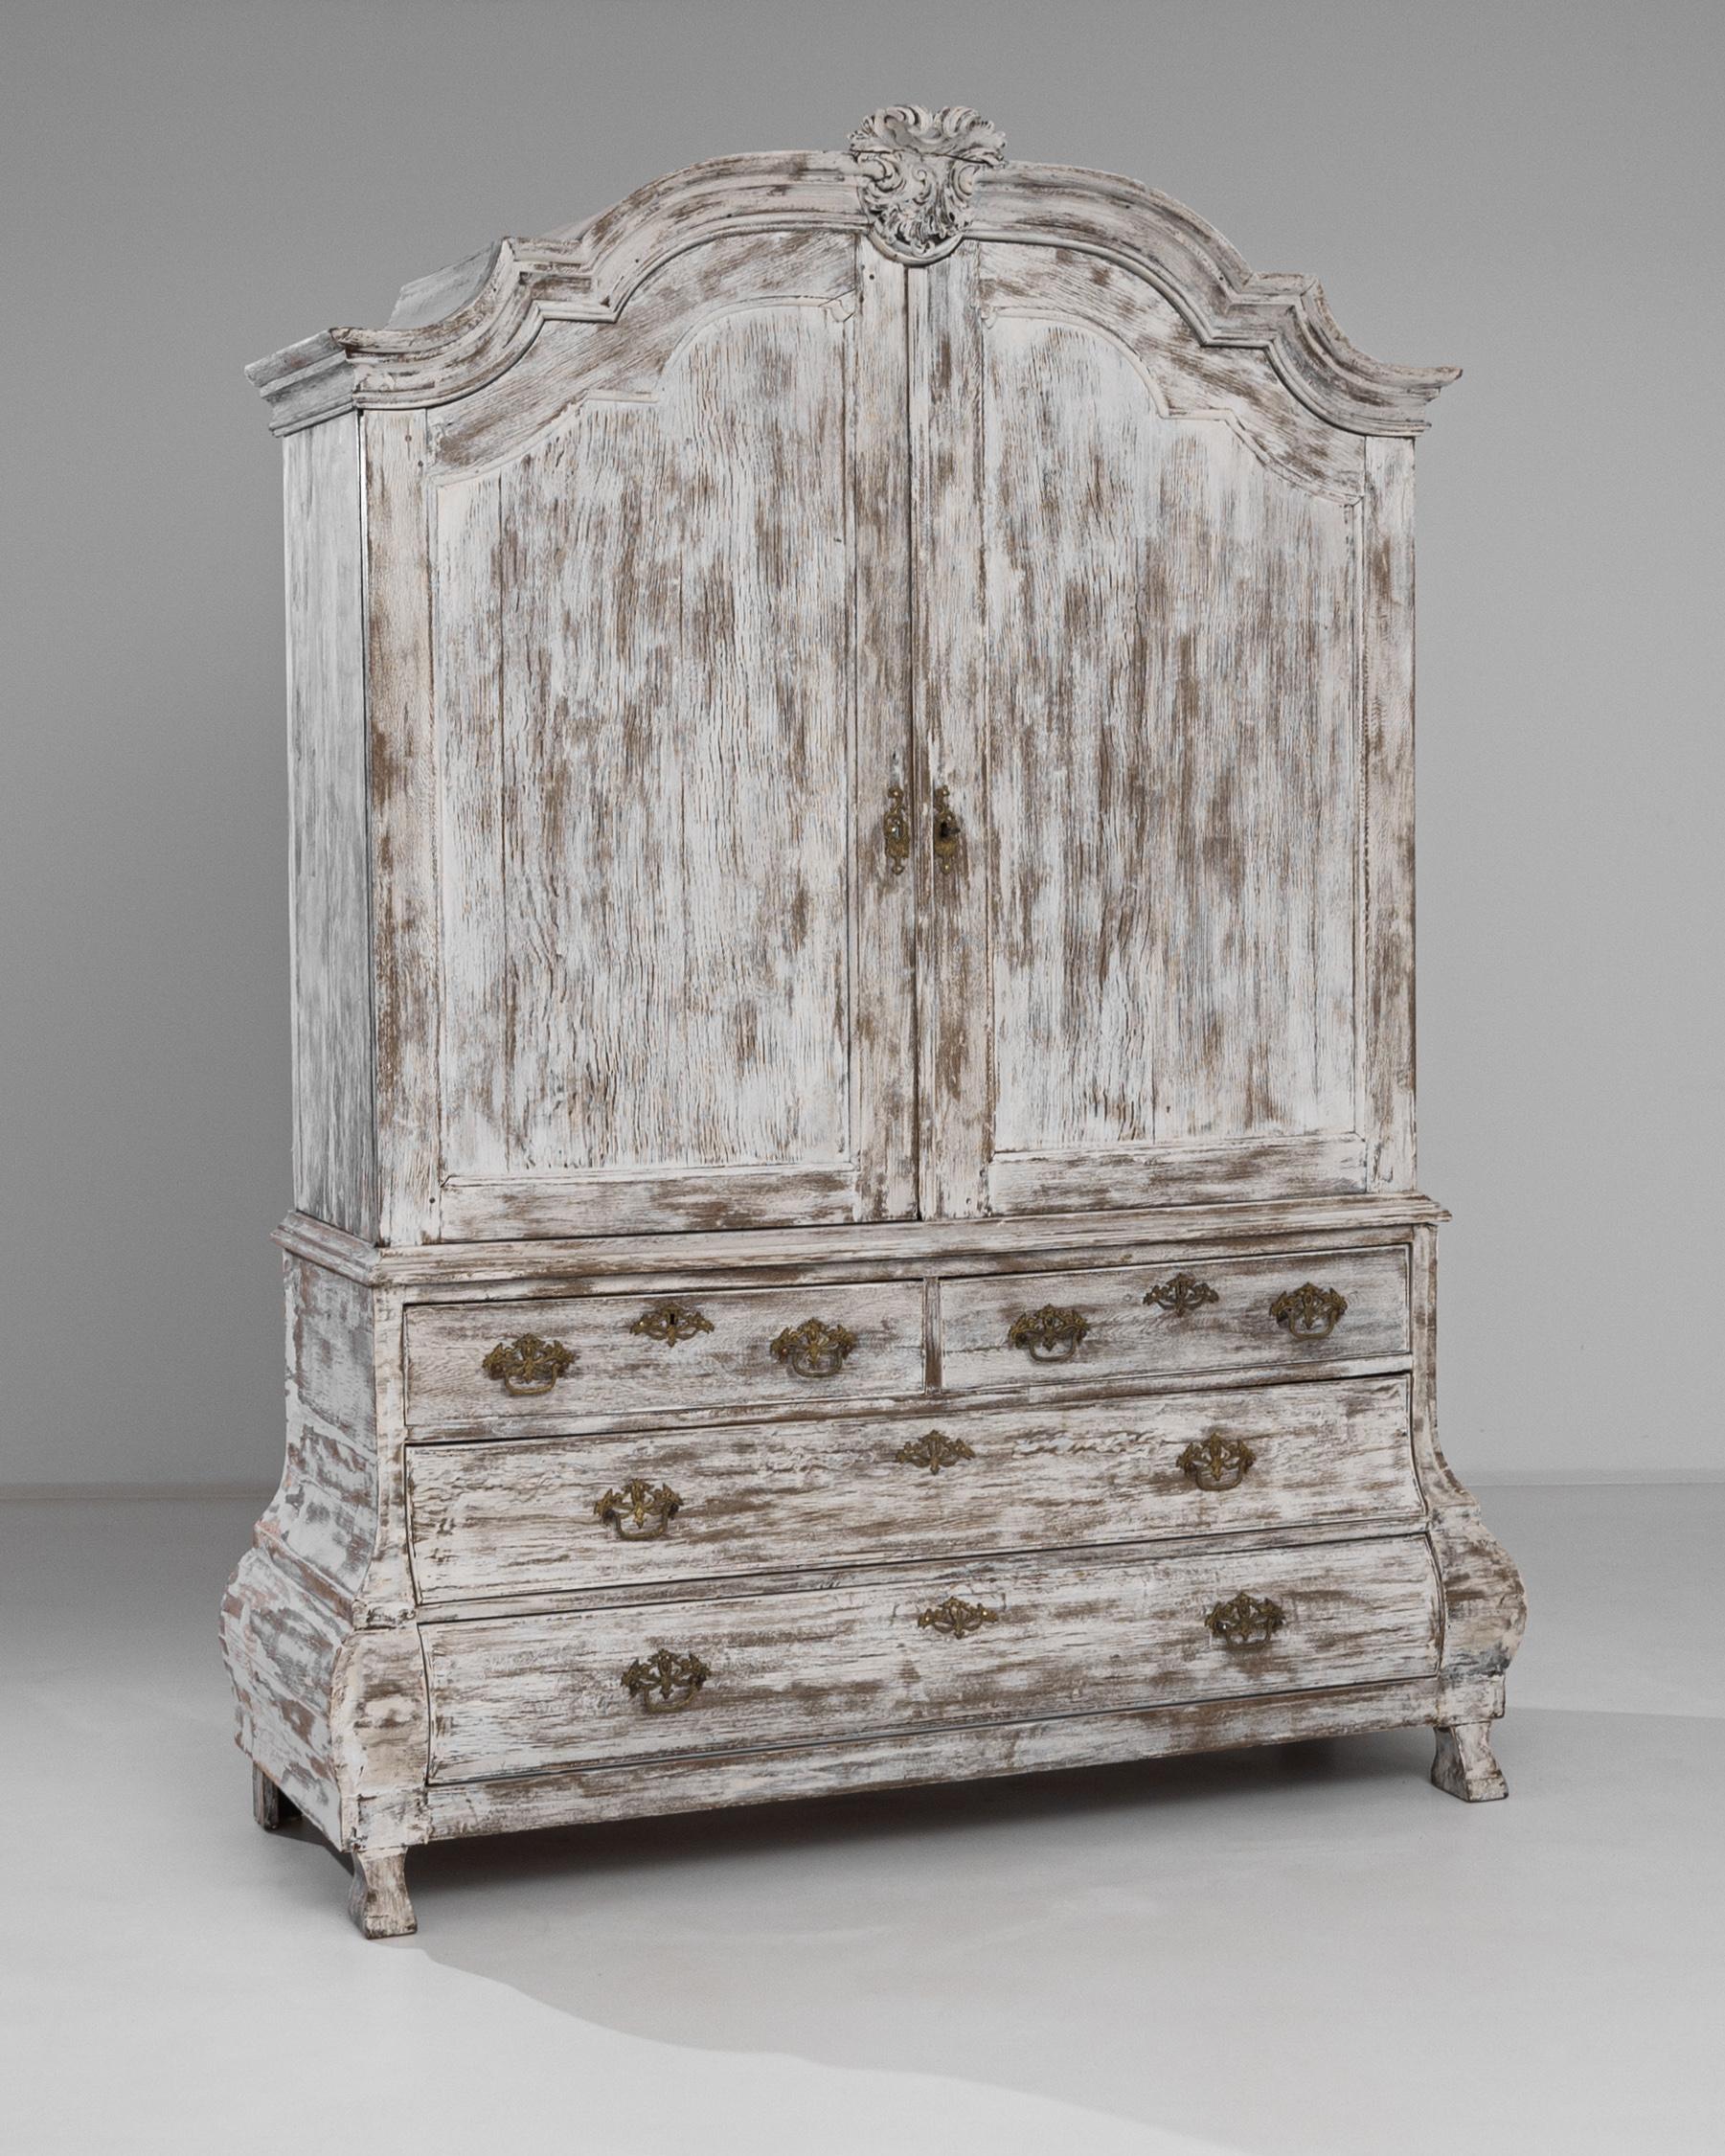 This stylish antique cabinet lends an air of grandeur to any space. Made in the Netherlands circa 1800, the broad case stands proudly atop curved feet. Elaborate moldings are crowned by a carved acanthus motif — a foliate design that has inspired